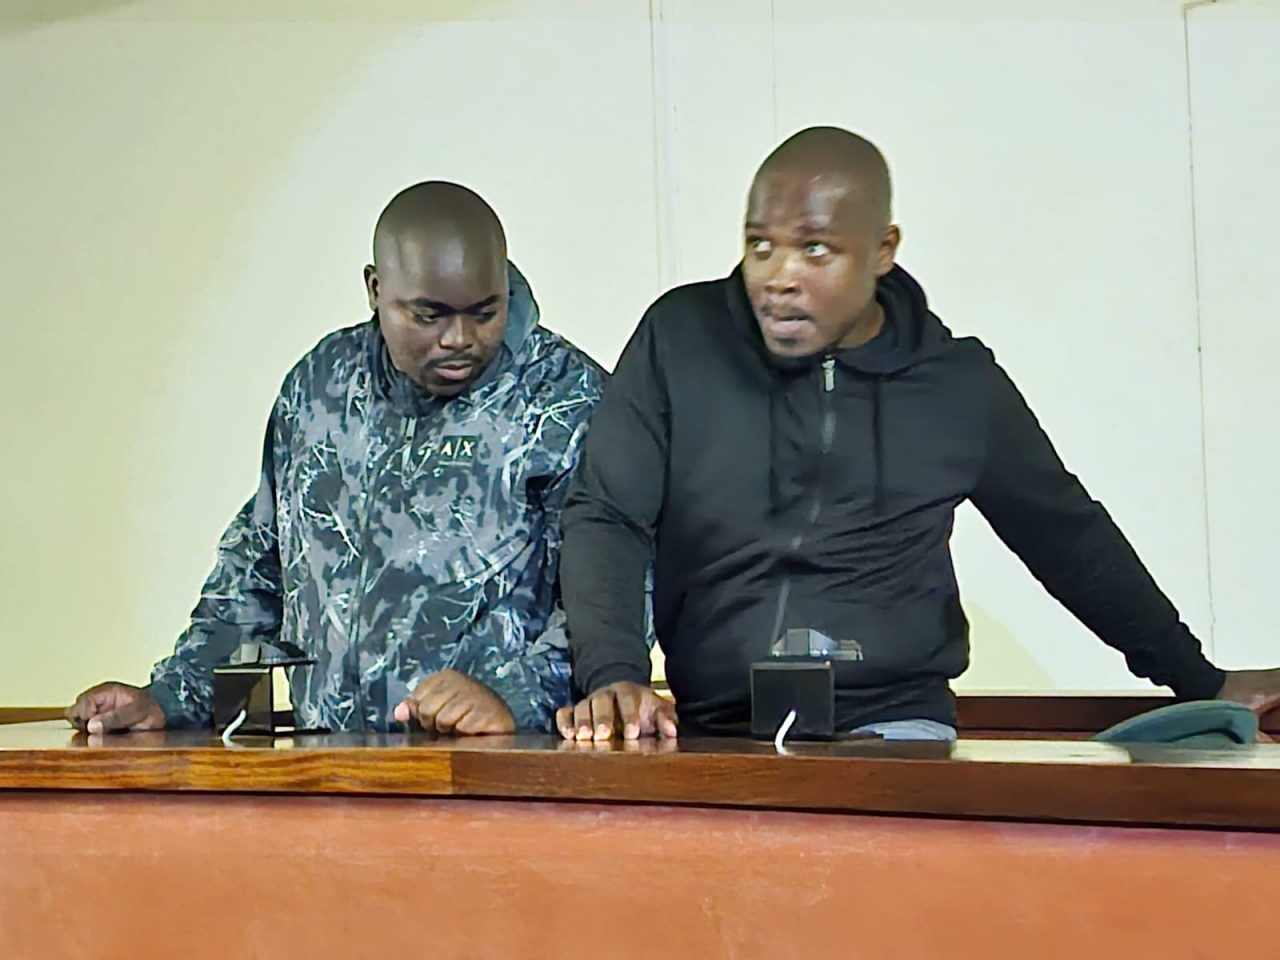 Brothers Siyabonga Ndimande and Malusi Ndimande were apprehended after authorities launched a comprehensive manhunt that led them to Mbabane, Eswatini, where the pair were arrested. (Picture via X - @SABCTindzaba)